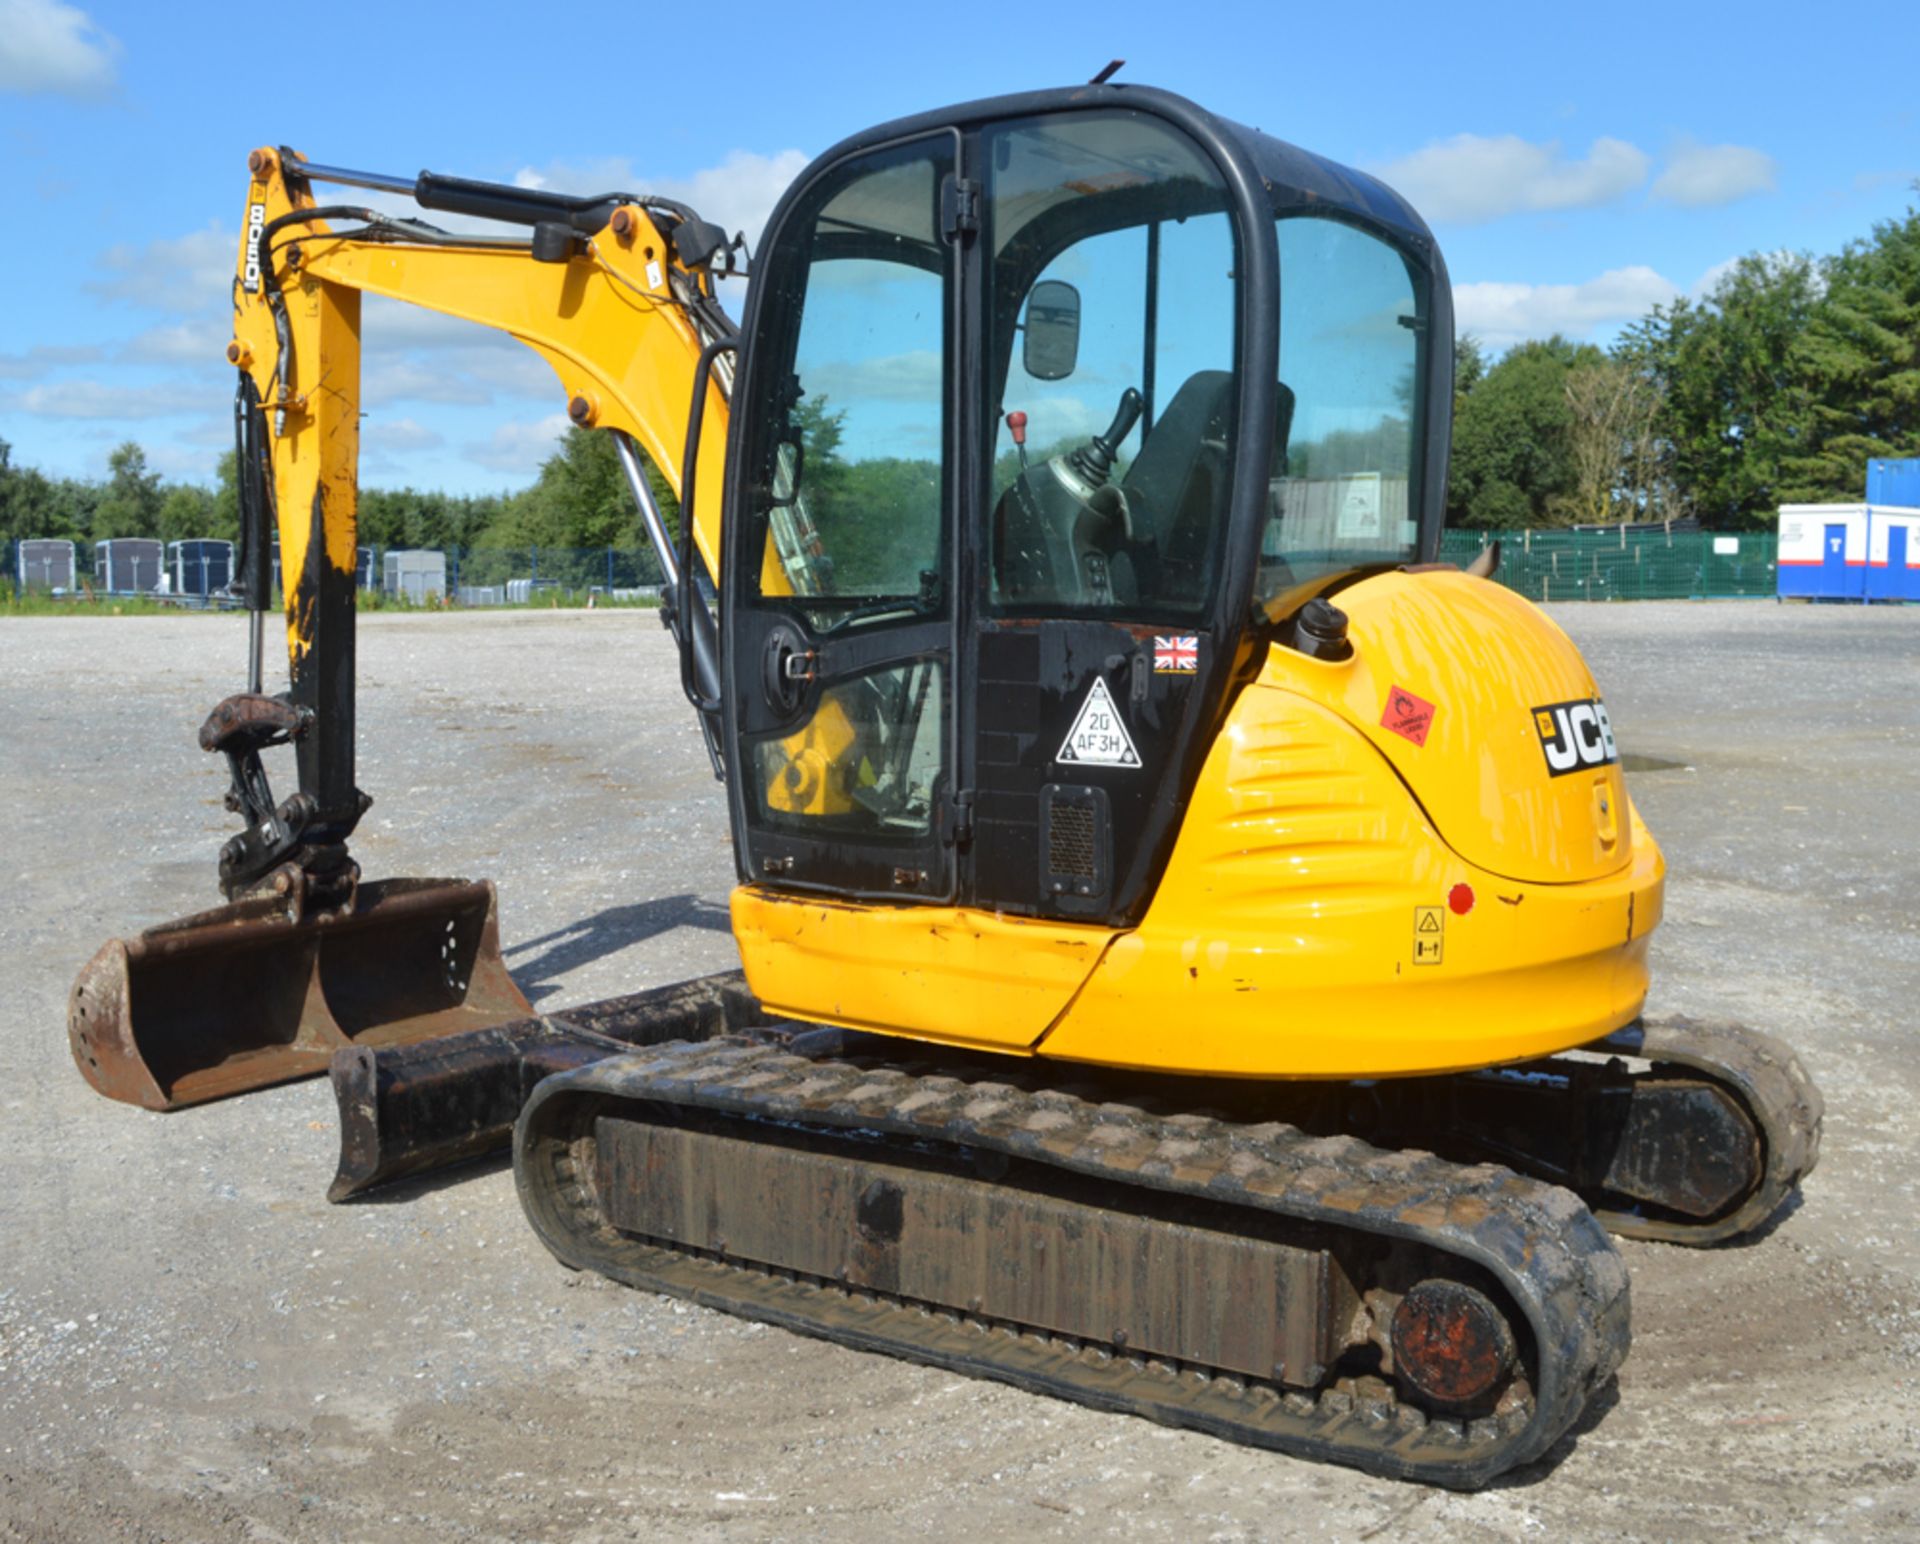 JCB 8050 RTS 5 tonne zero tail swing rubber tracked midi excavator Year: 2012 S/N: 1741687 - Image 2 of 11